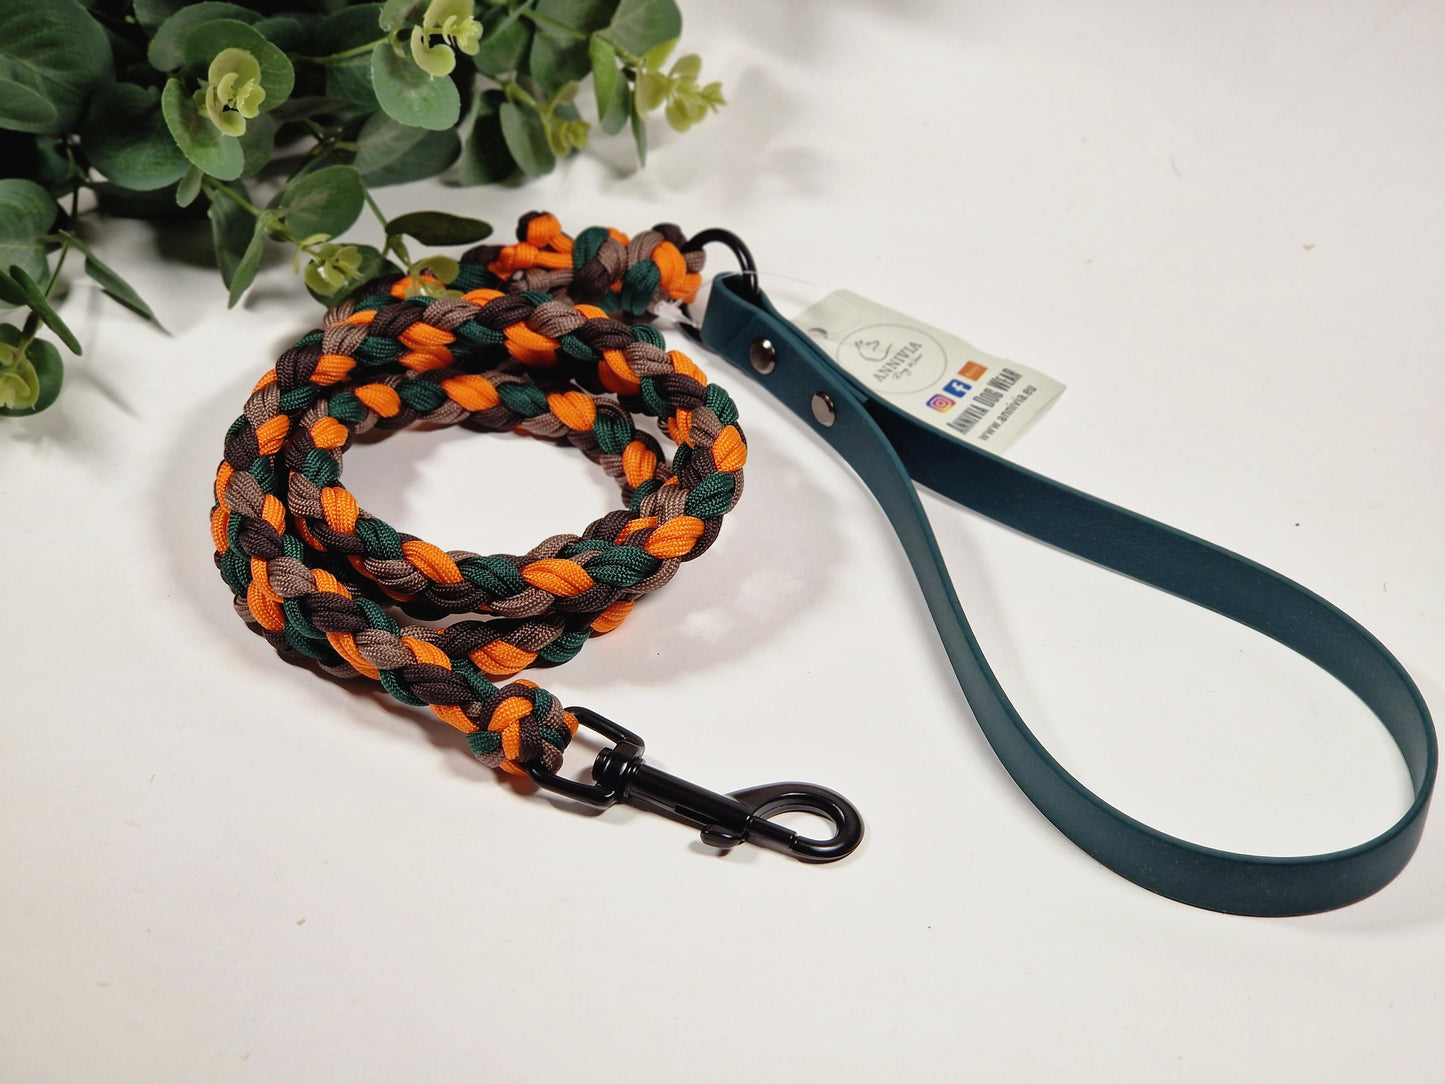 Paracord braided dog leash 1.5m - forest